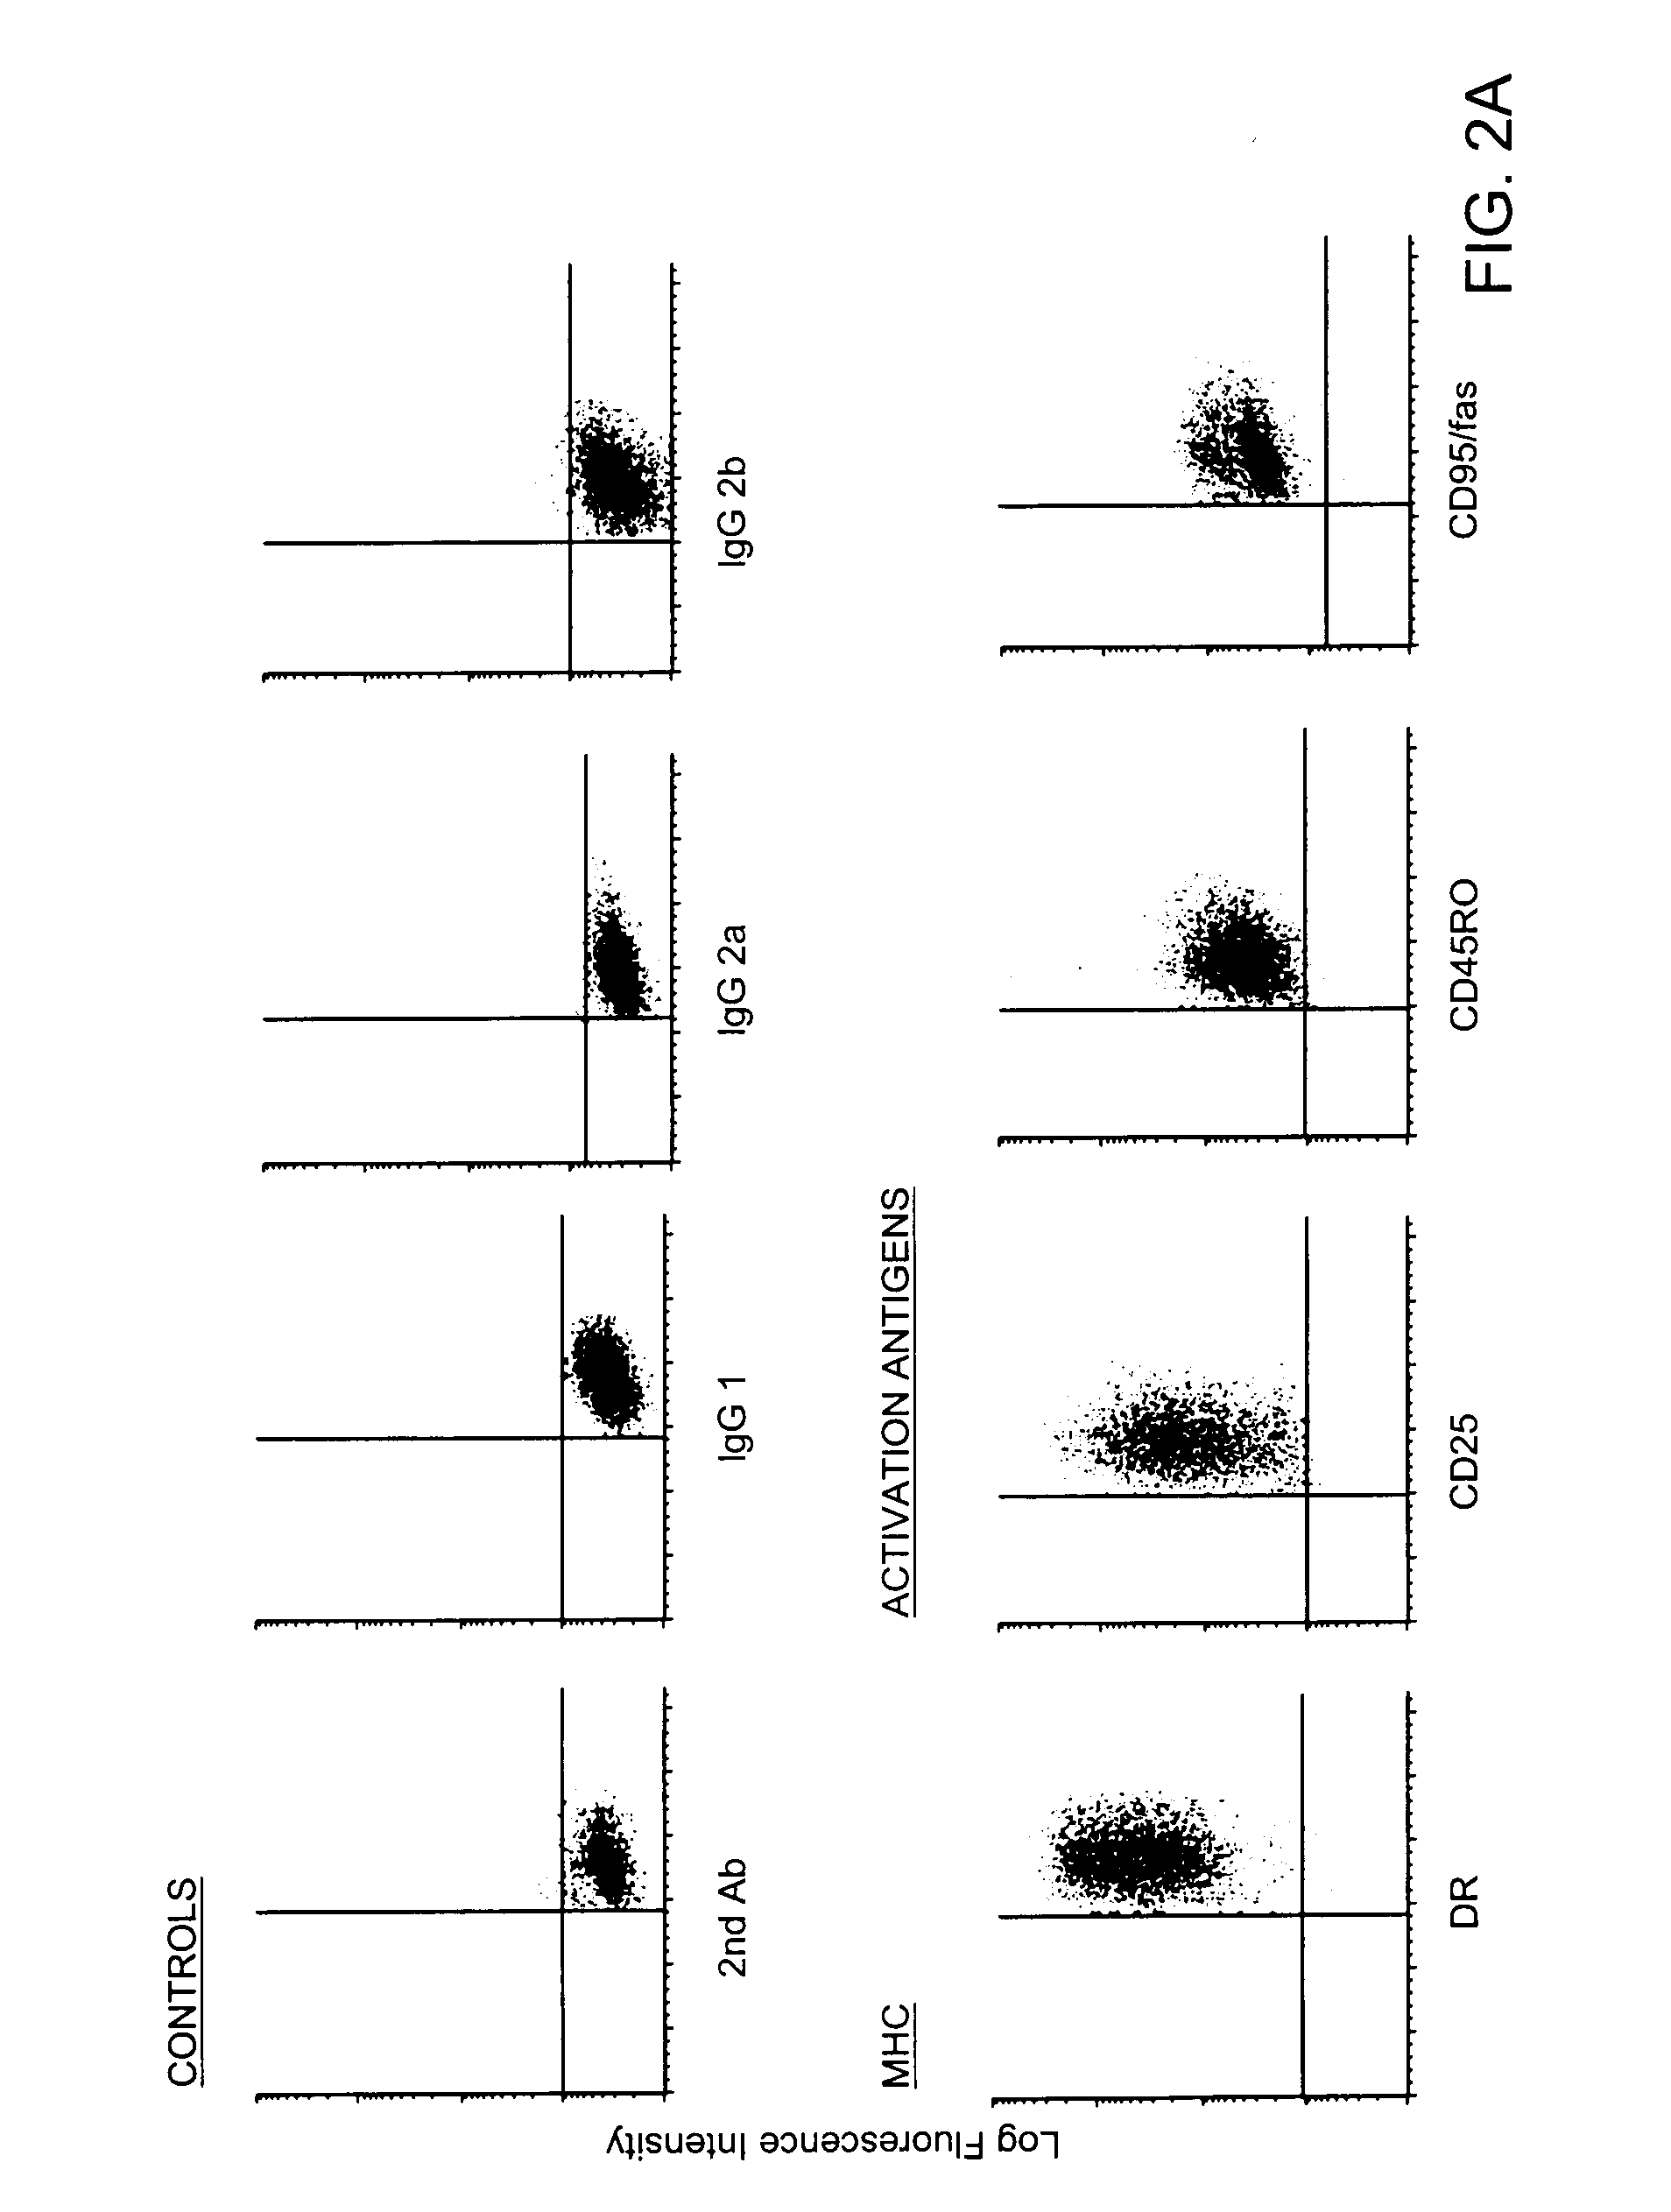 Method and compositions for obtaining mature dendritic cells